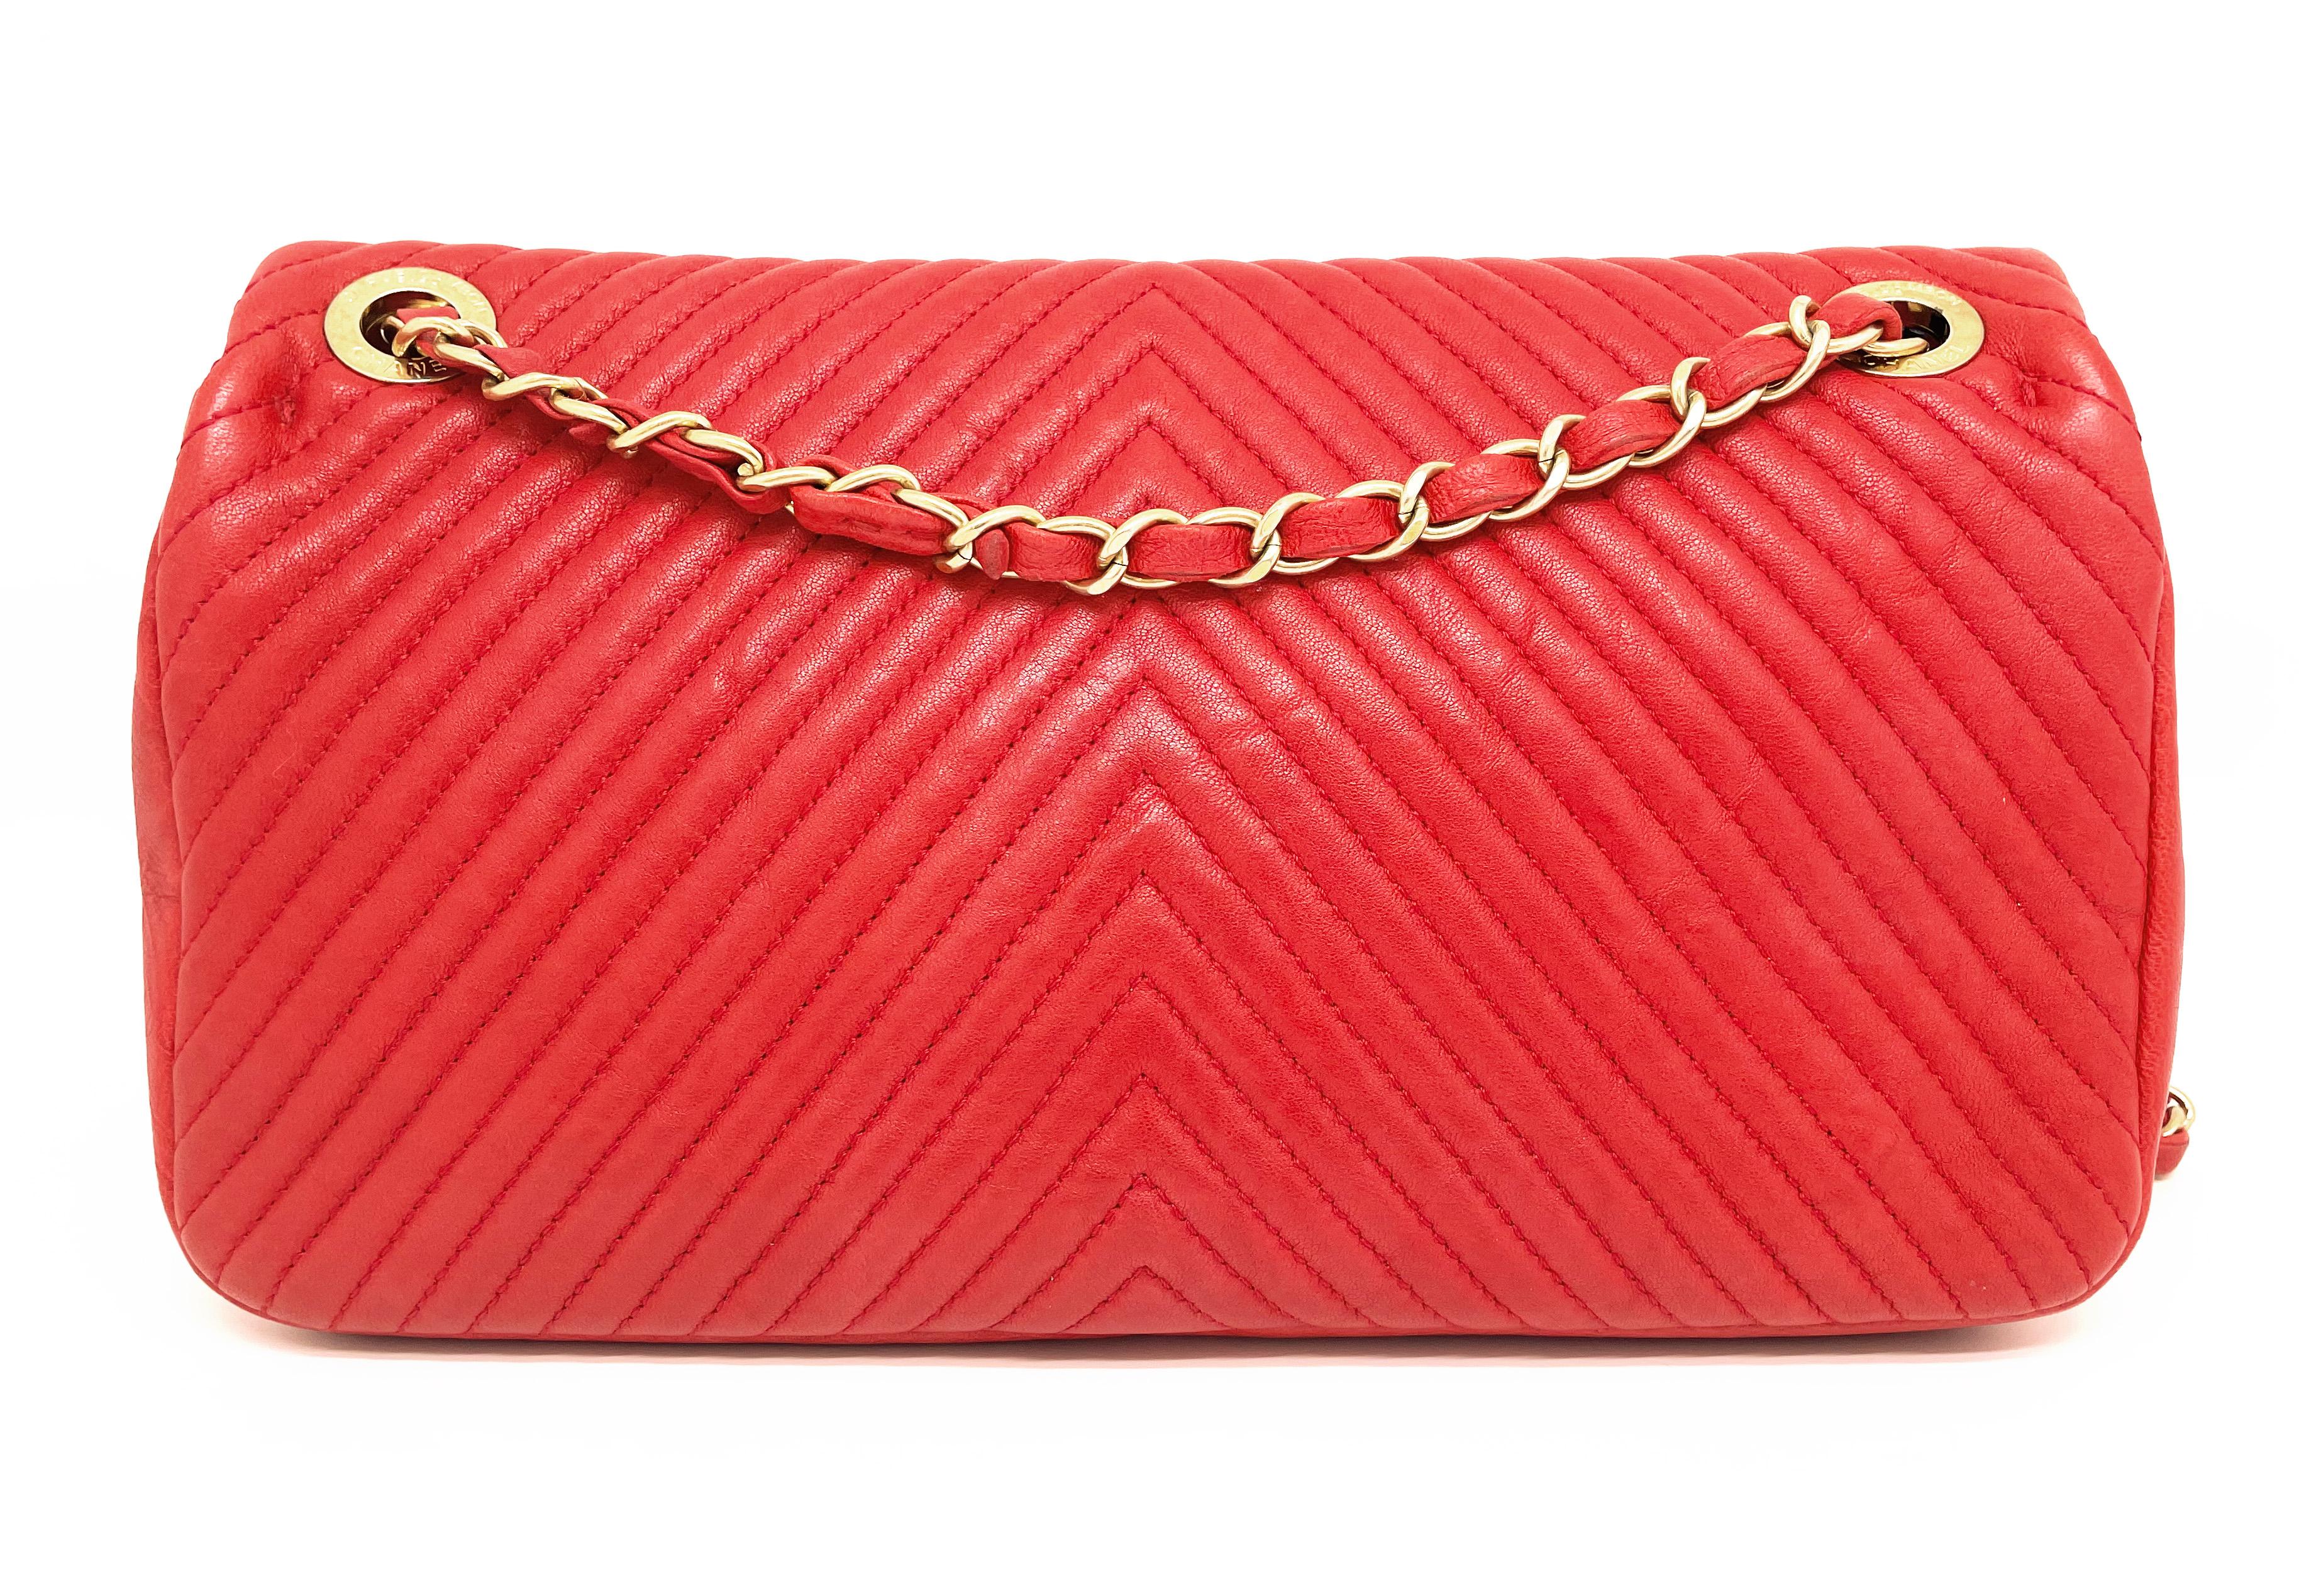 Superb Chanel 27 cm bag in leather and Valentine Red Chevron pattern For Sale 3